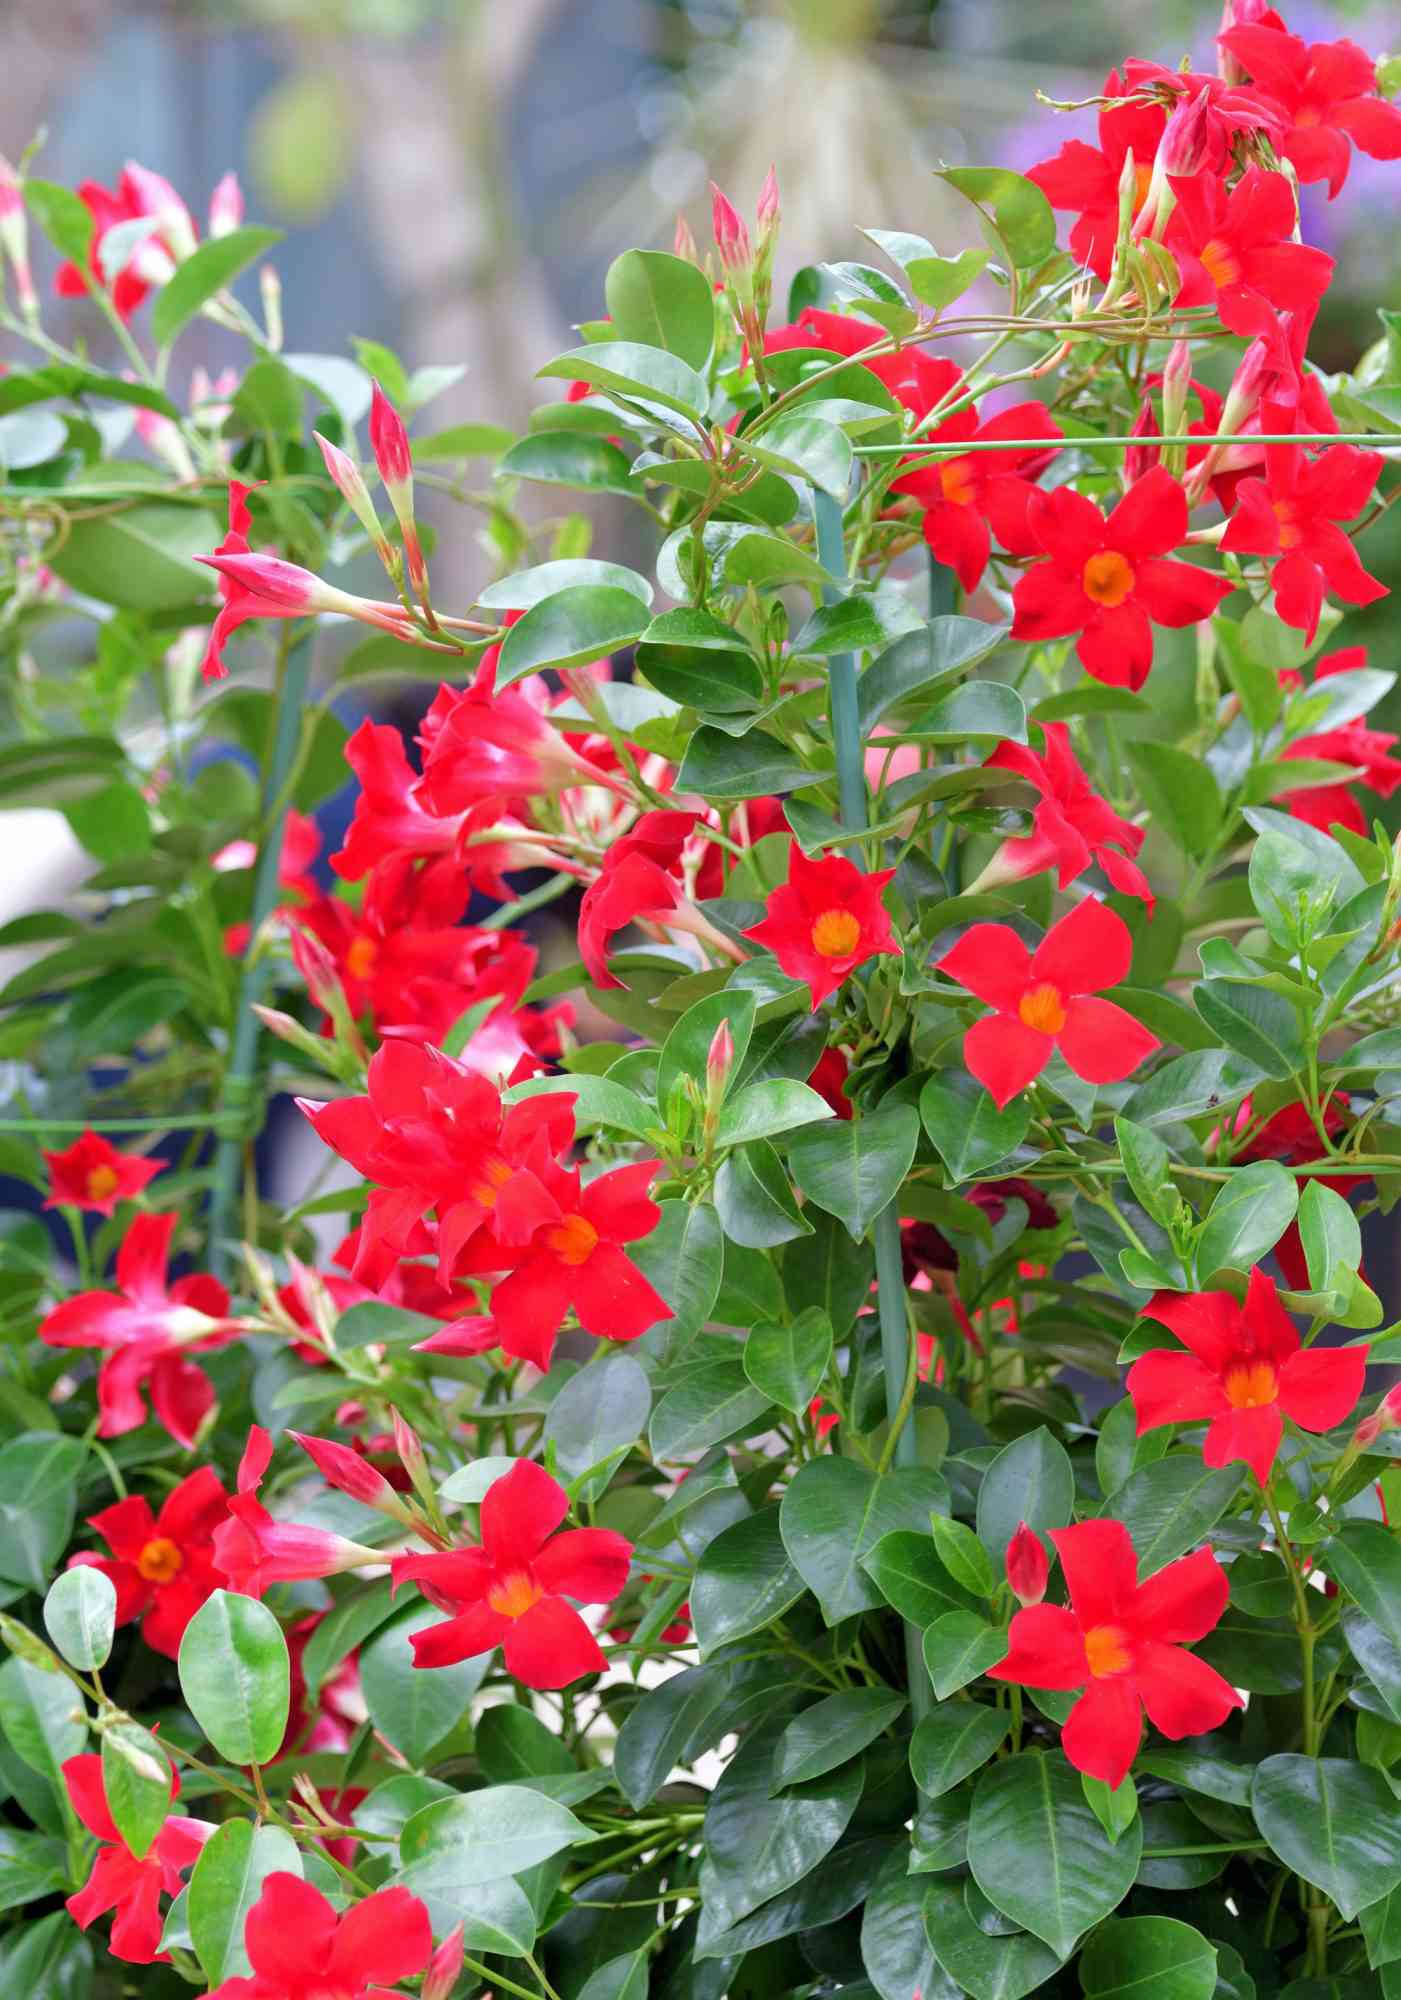 red vibrant blooms on vining plant